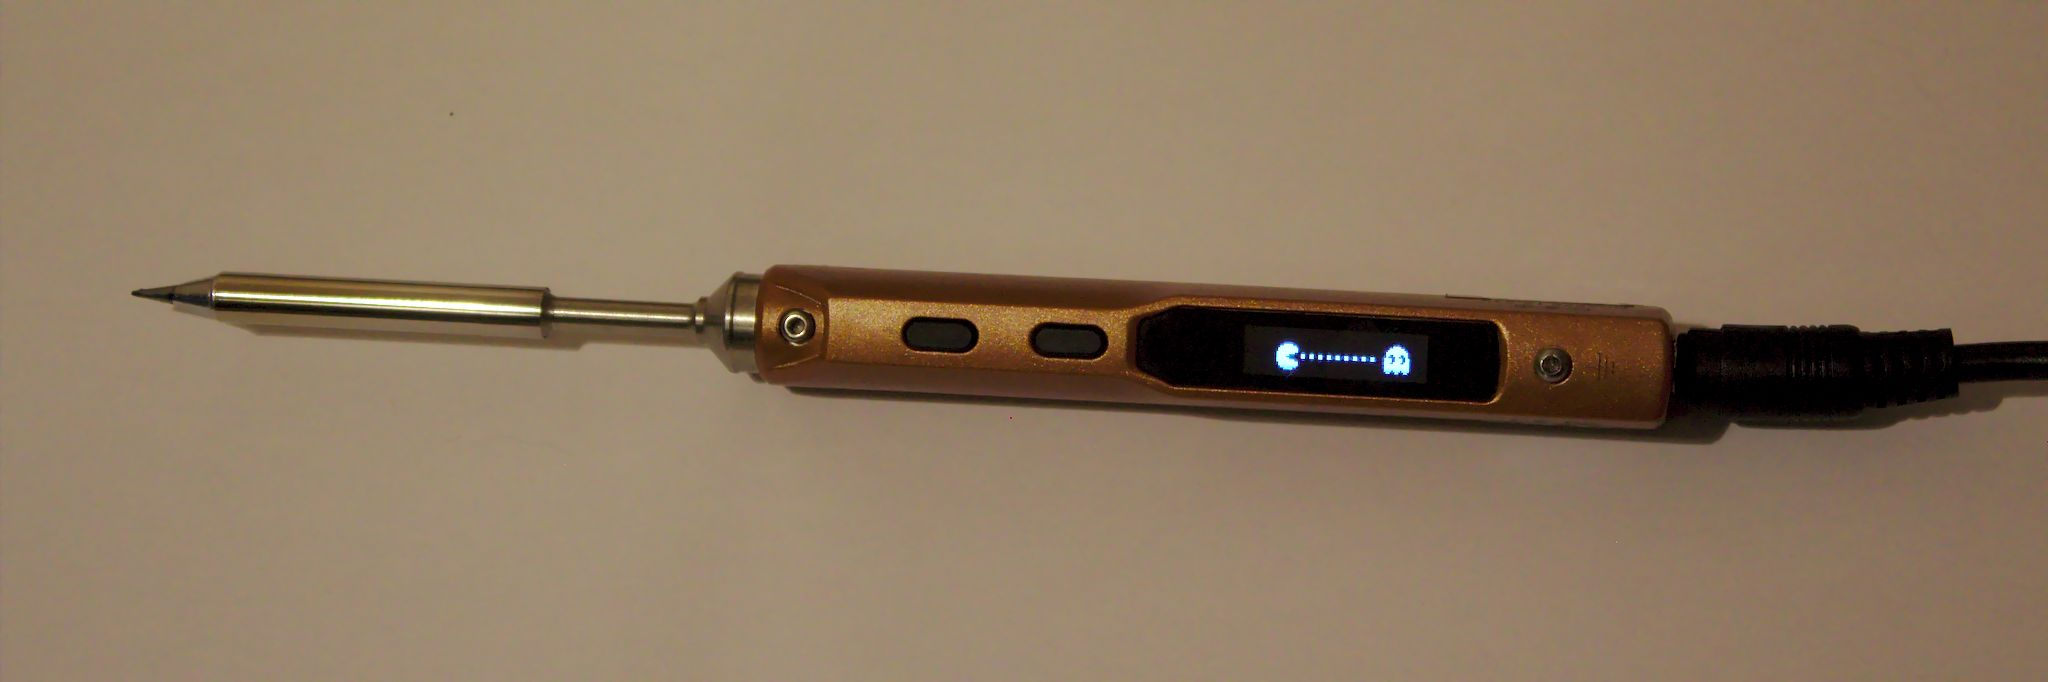 The TS100 soldering iron with pacman logo